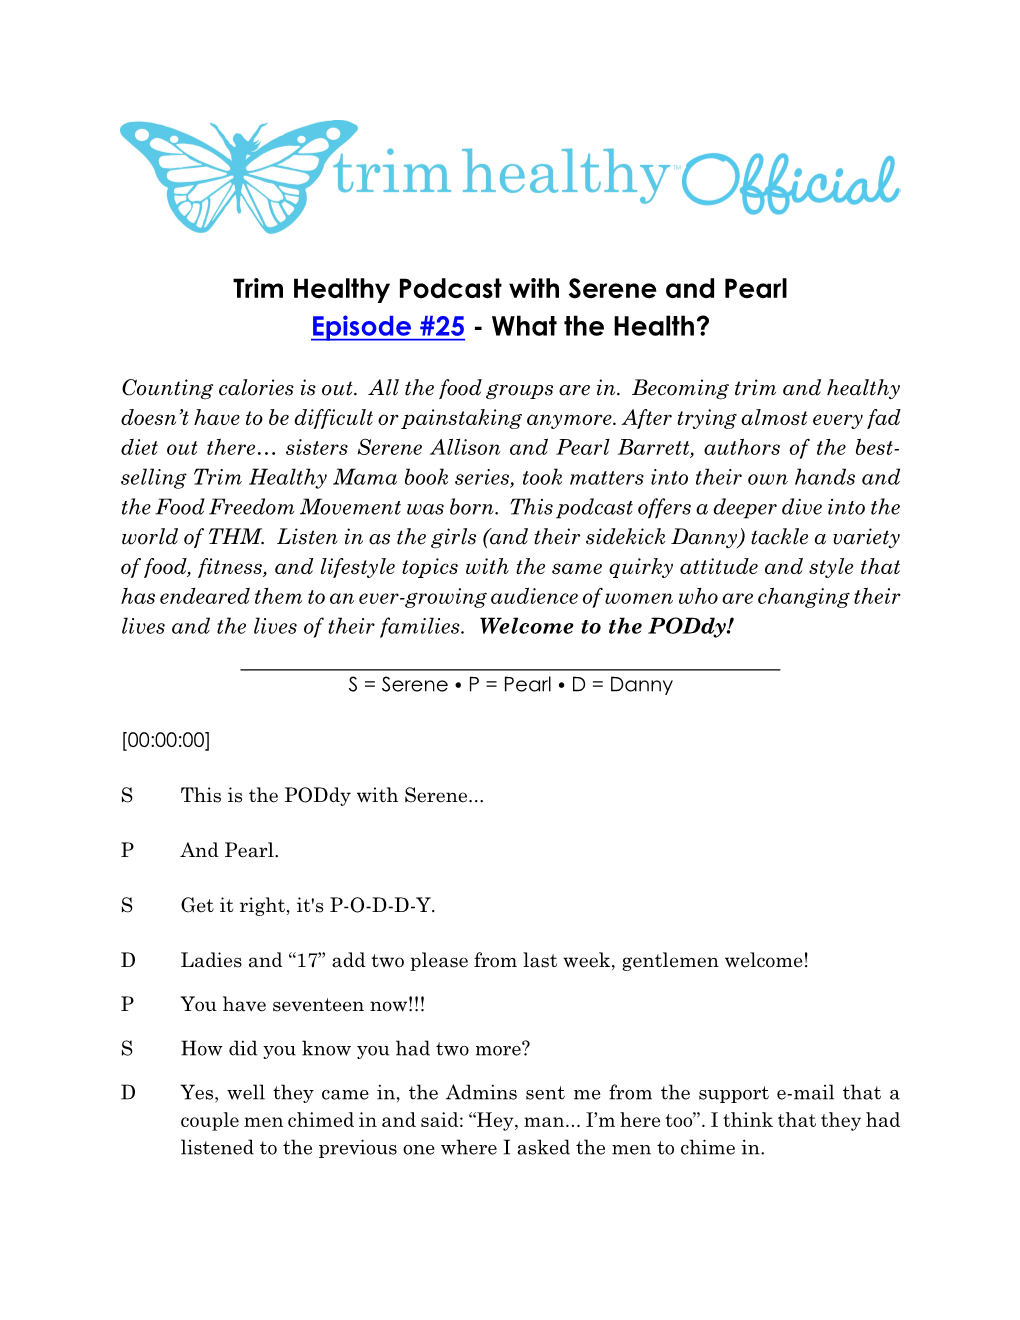 Trim Healthy Podcast with Serene and Pearl Episode #25 - What the Health?